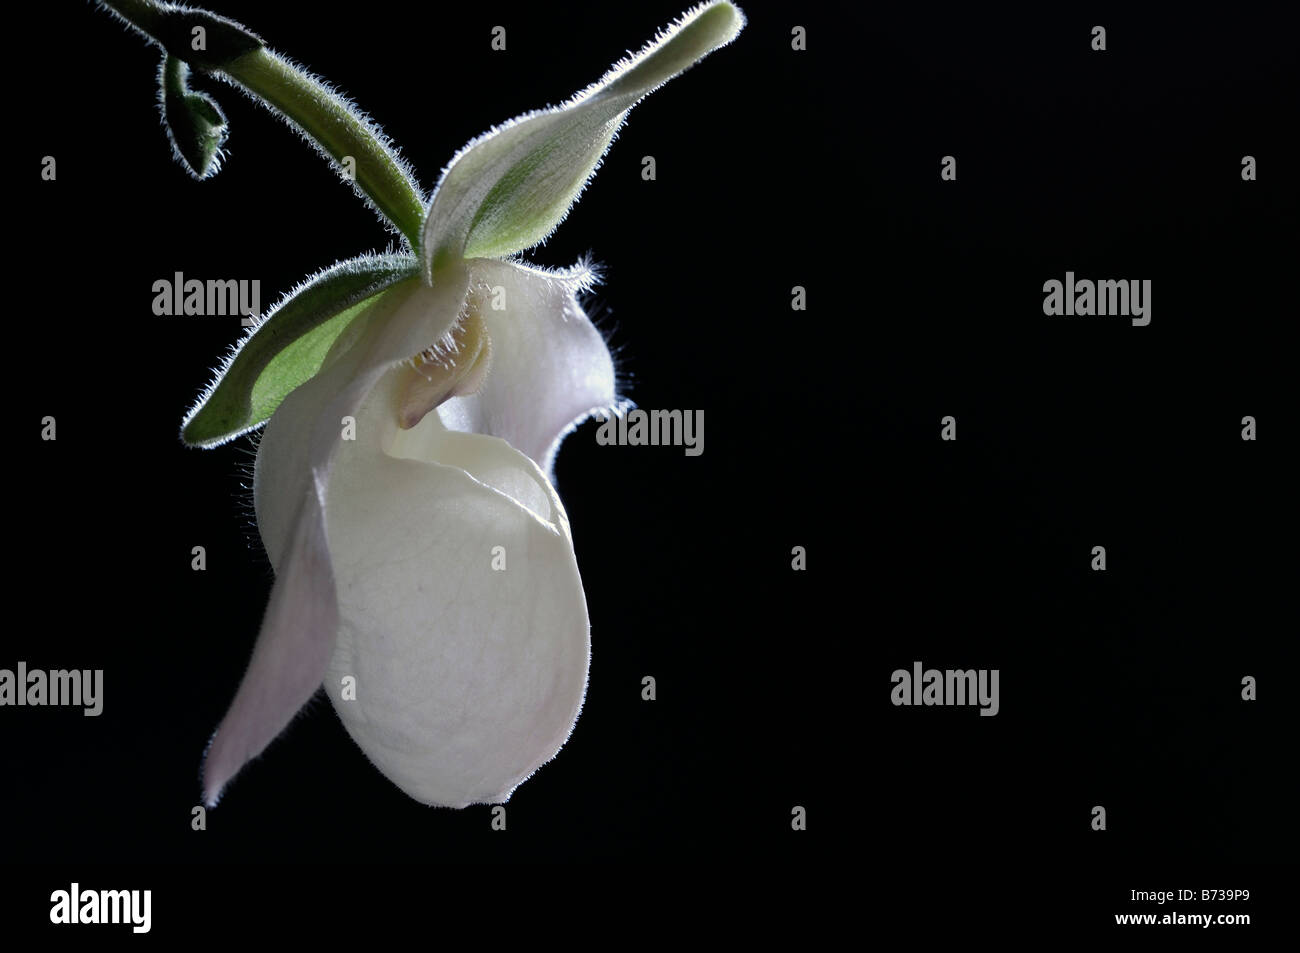 paphiopedilum delenatii white slipper orchid single flower bloom blooming flowering against a black background backdrop Stock Photo